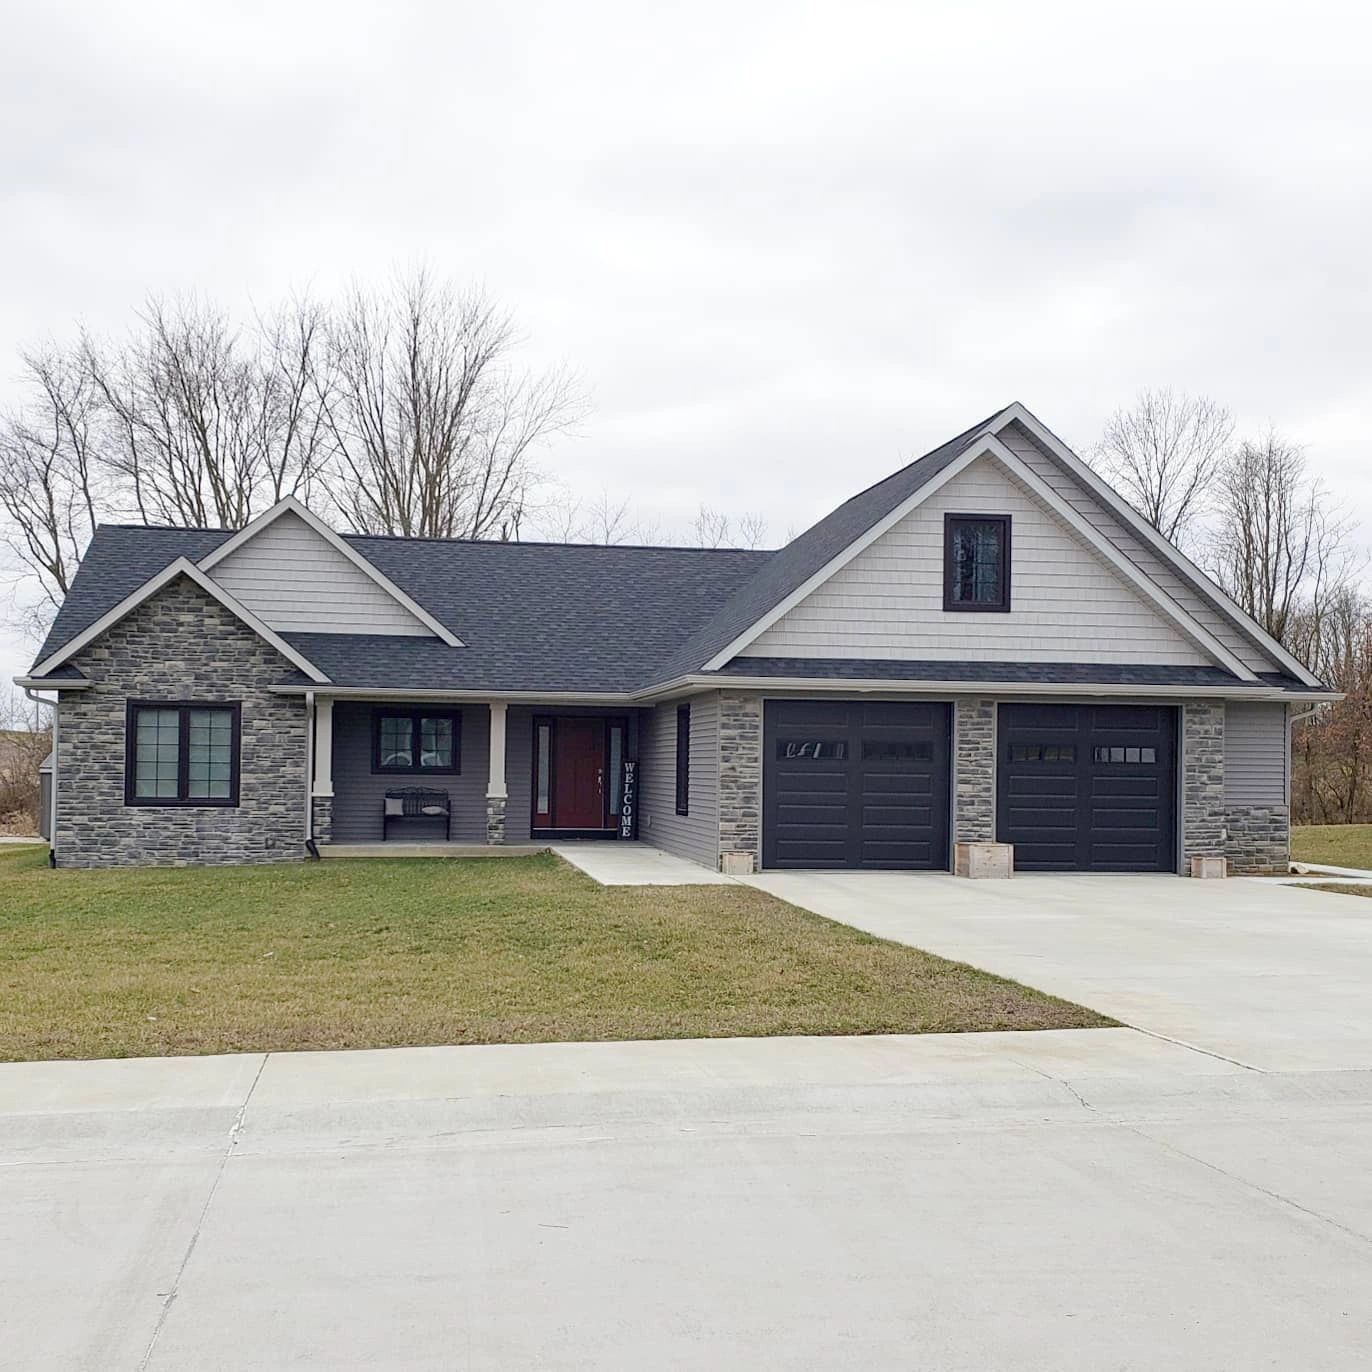 Gray sided house with stone accents, black windows, black garage doors, red entry door.